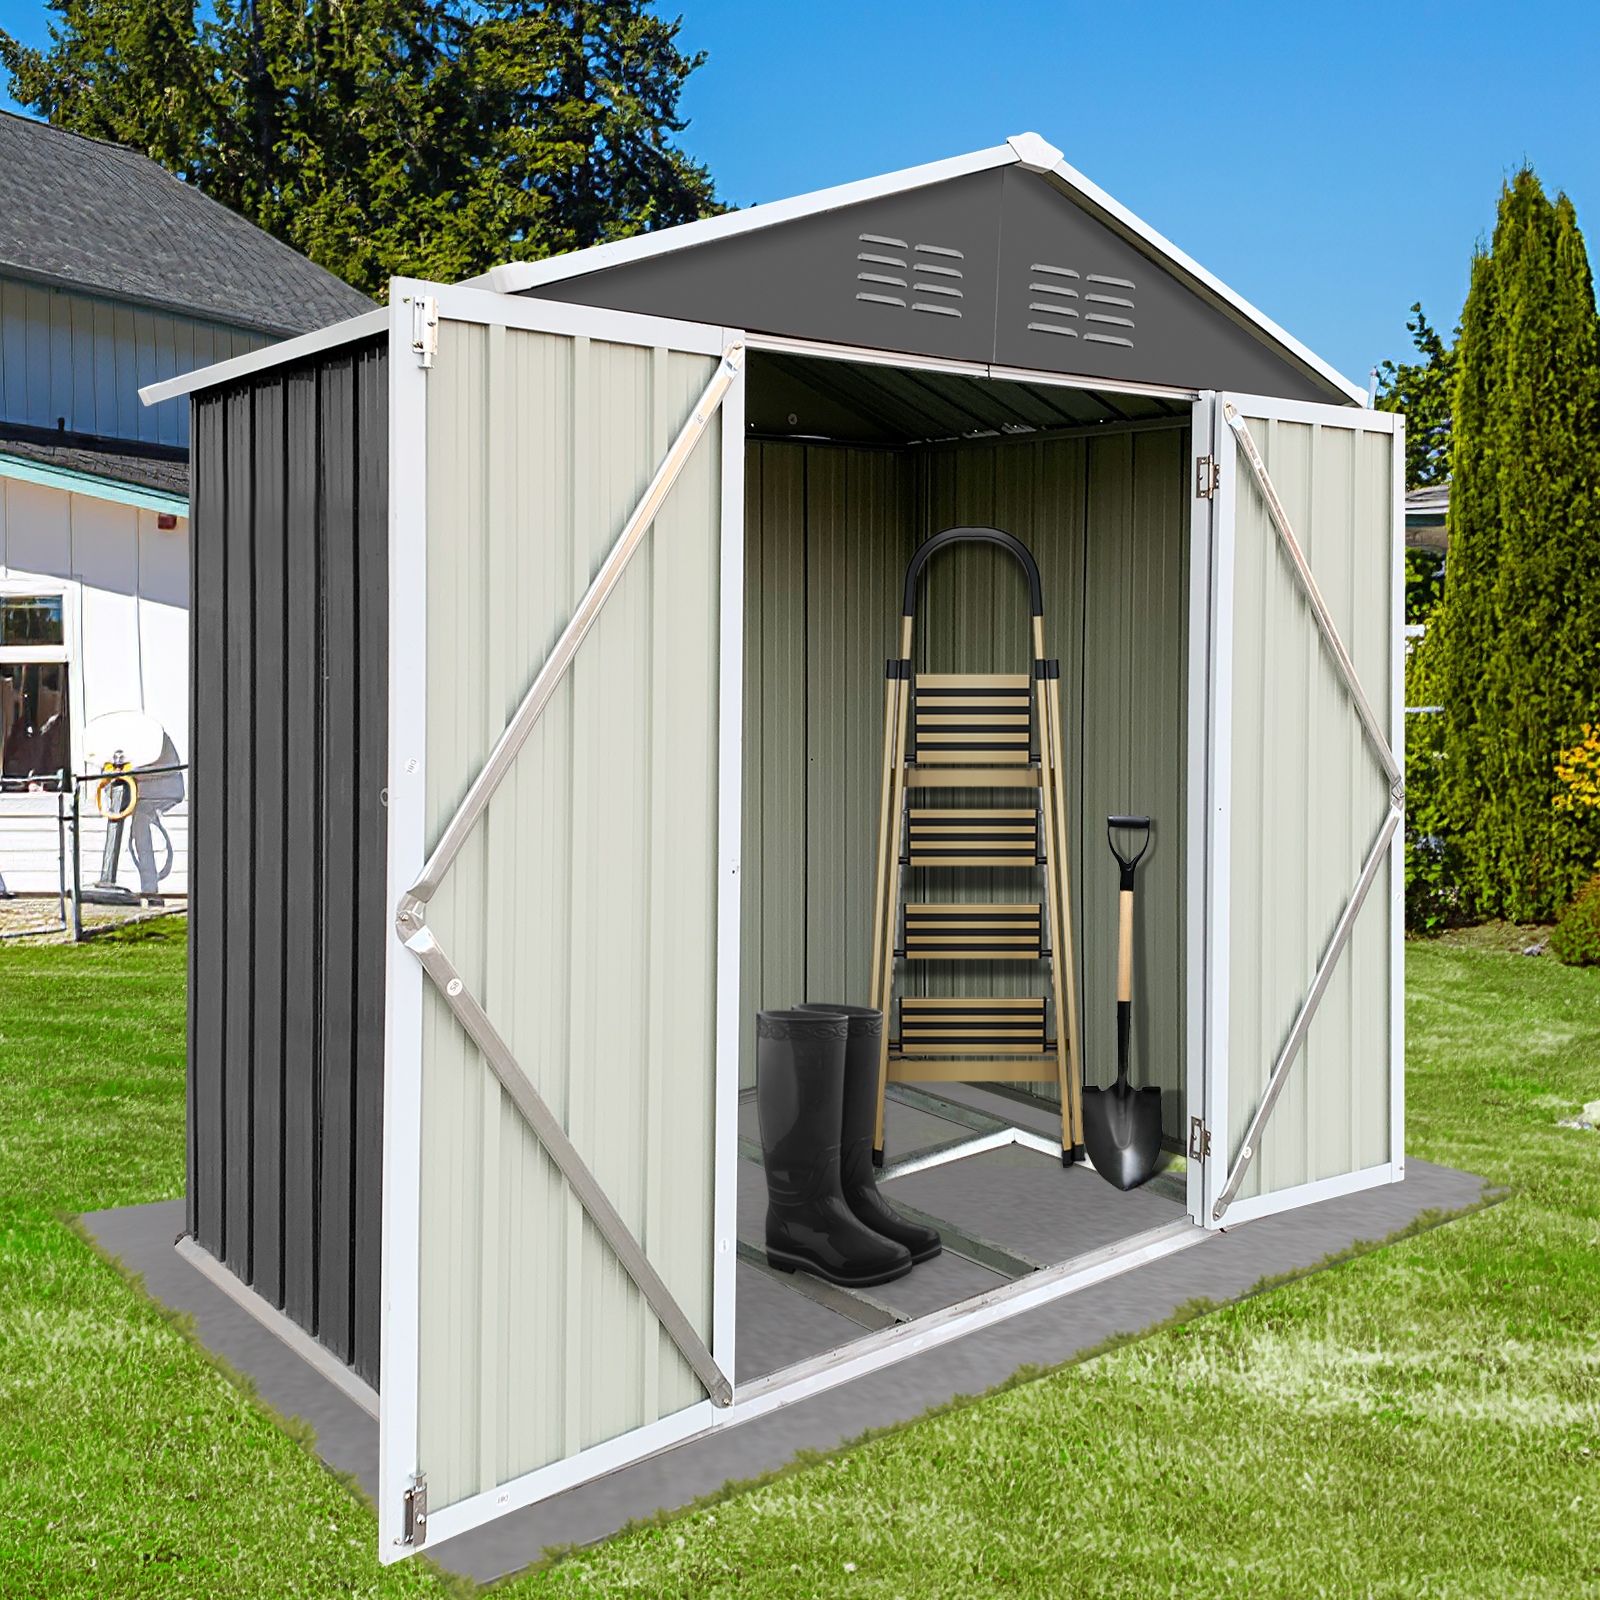 6' x 4' Outdoor Metal Storage Shed, Tools Storage Shed, Galvanized Steel Garden Shed with Lockable Doors, Outdoor Storage Shed for Backyard, Patio, Lawn, D8311 - image 4 of 9